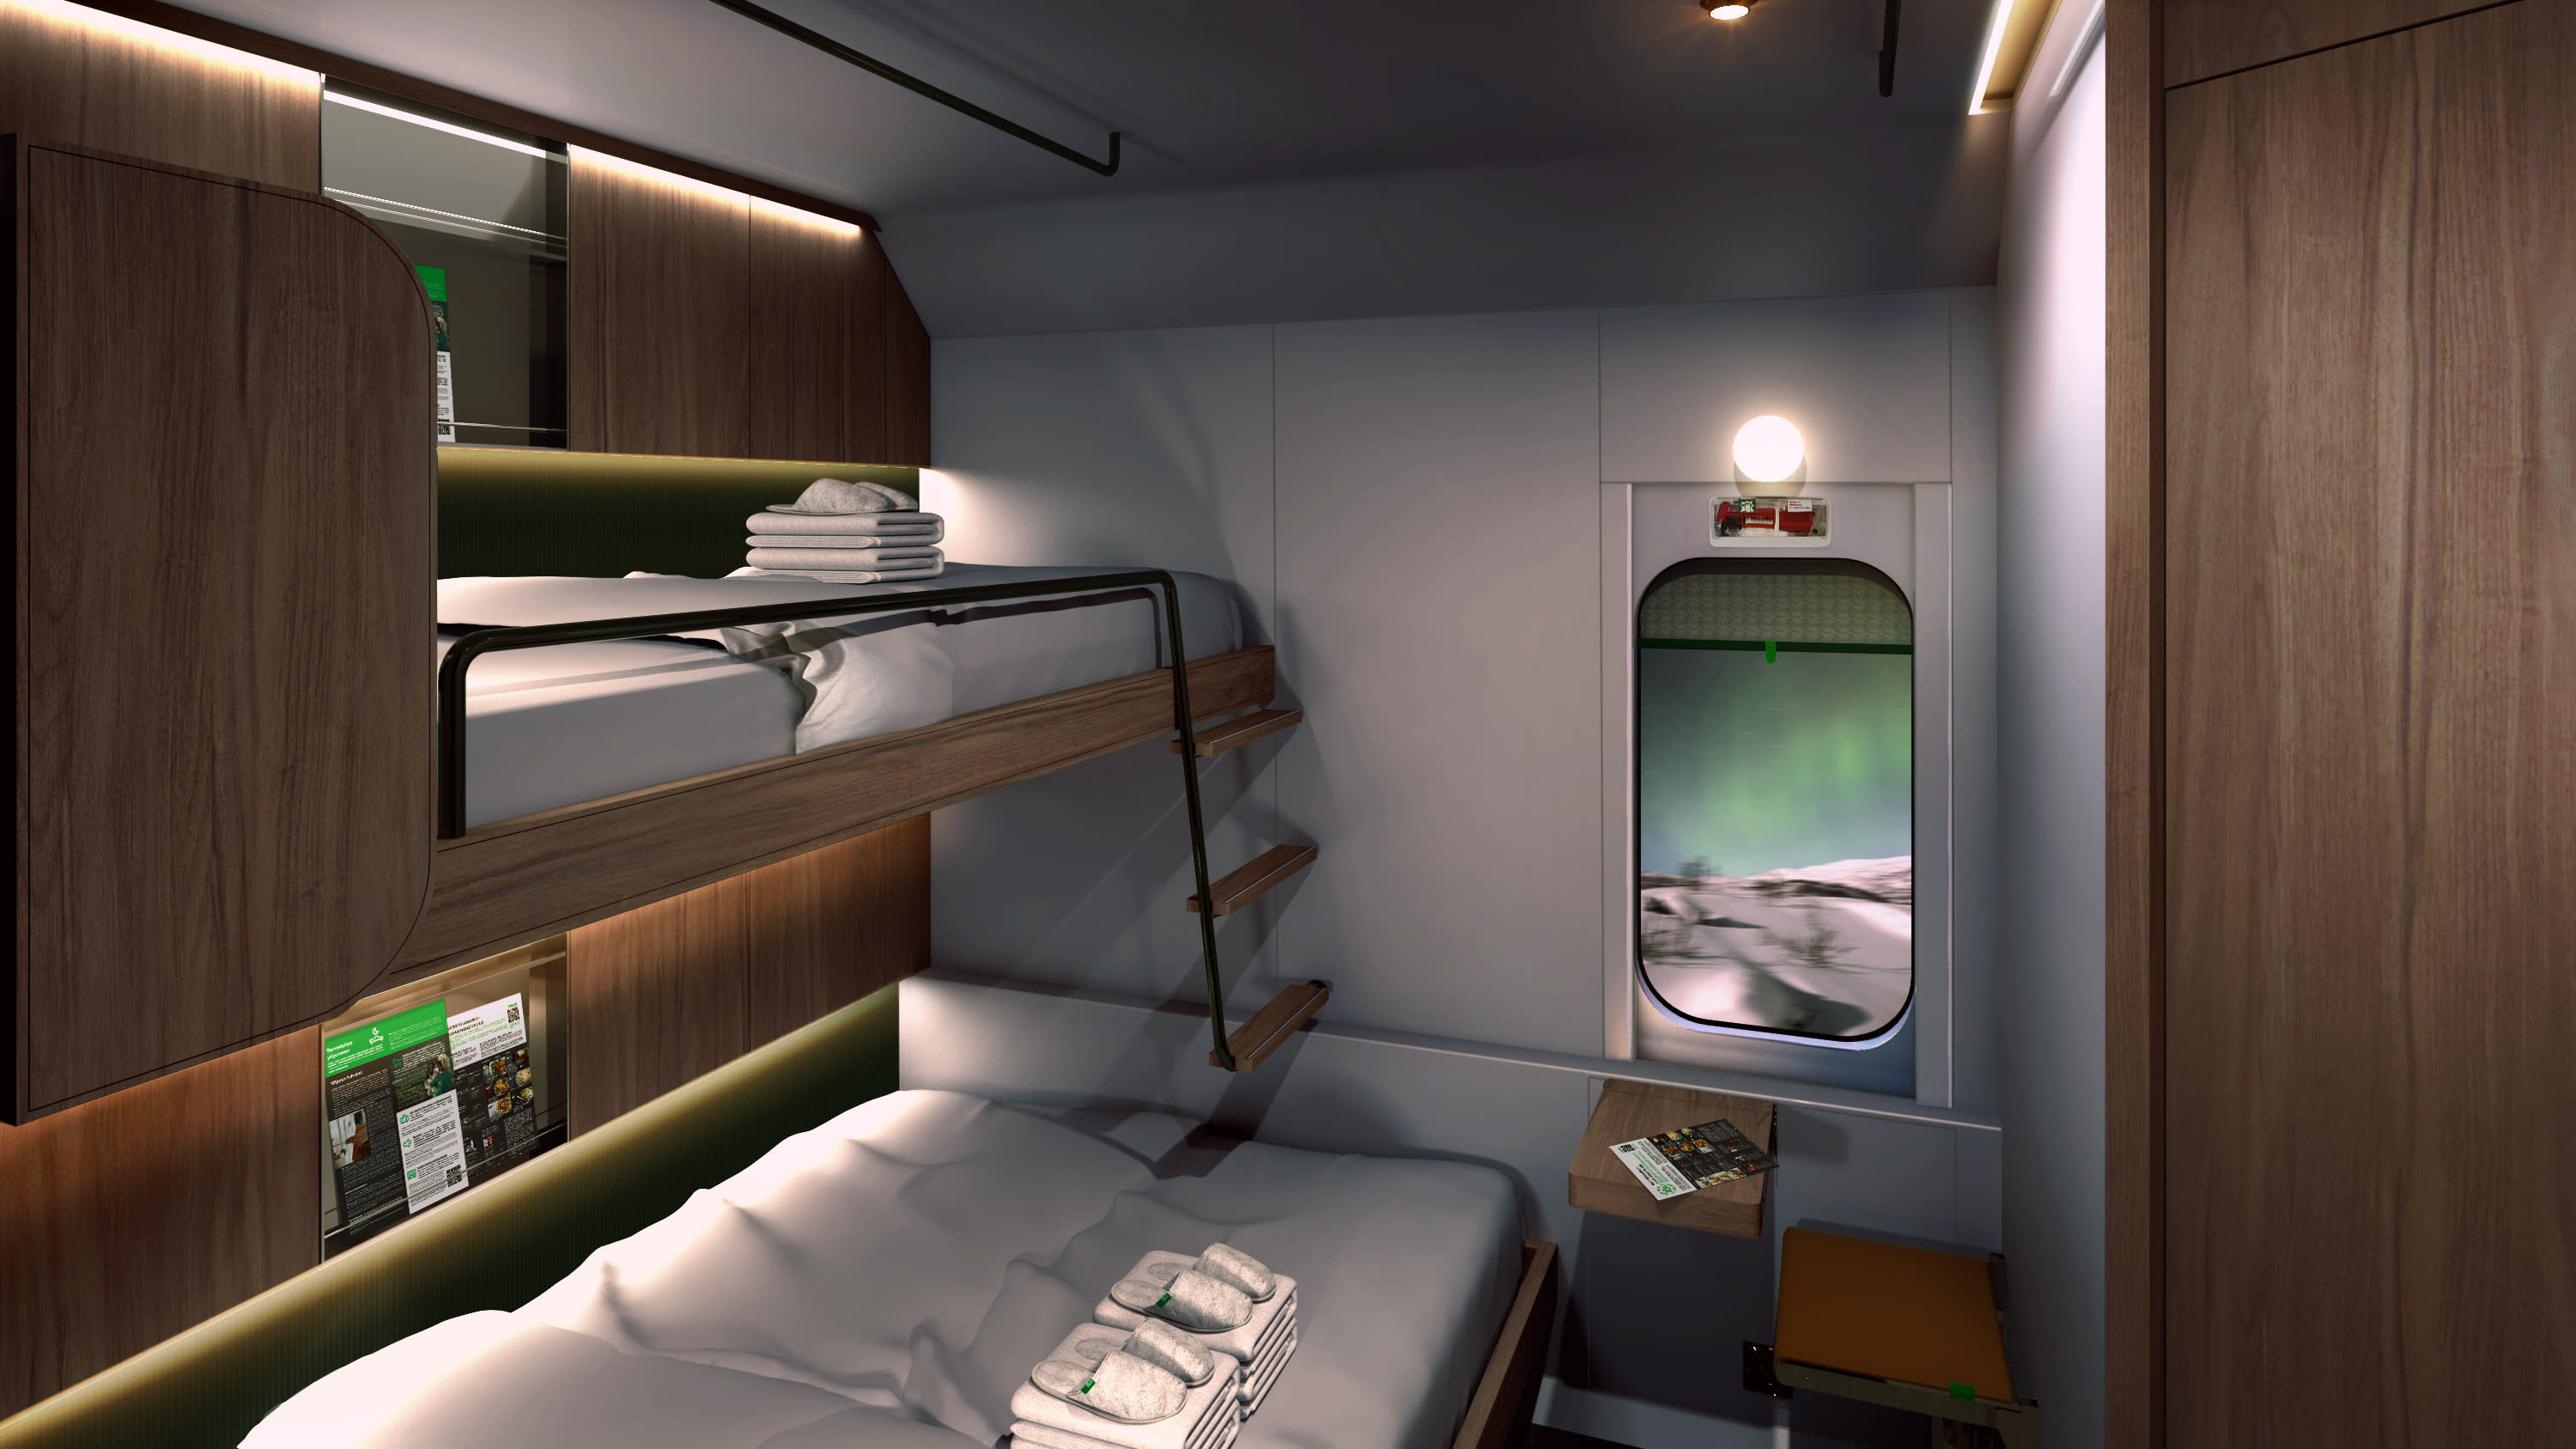 VR buys new sleeping carriages, vehicle carriages for 50 million